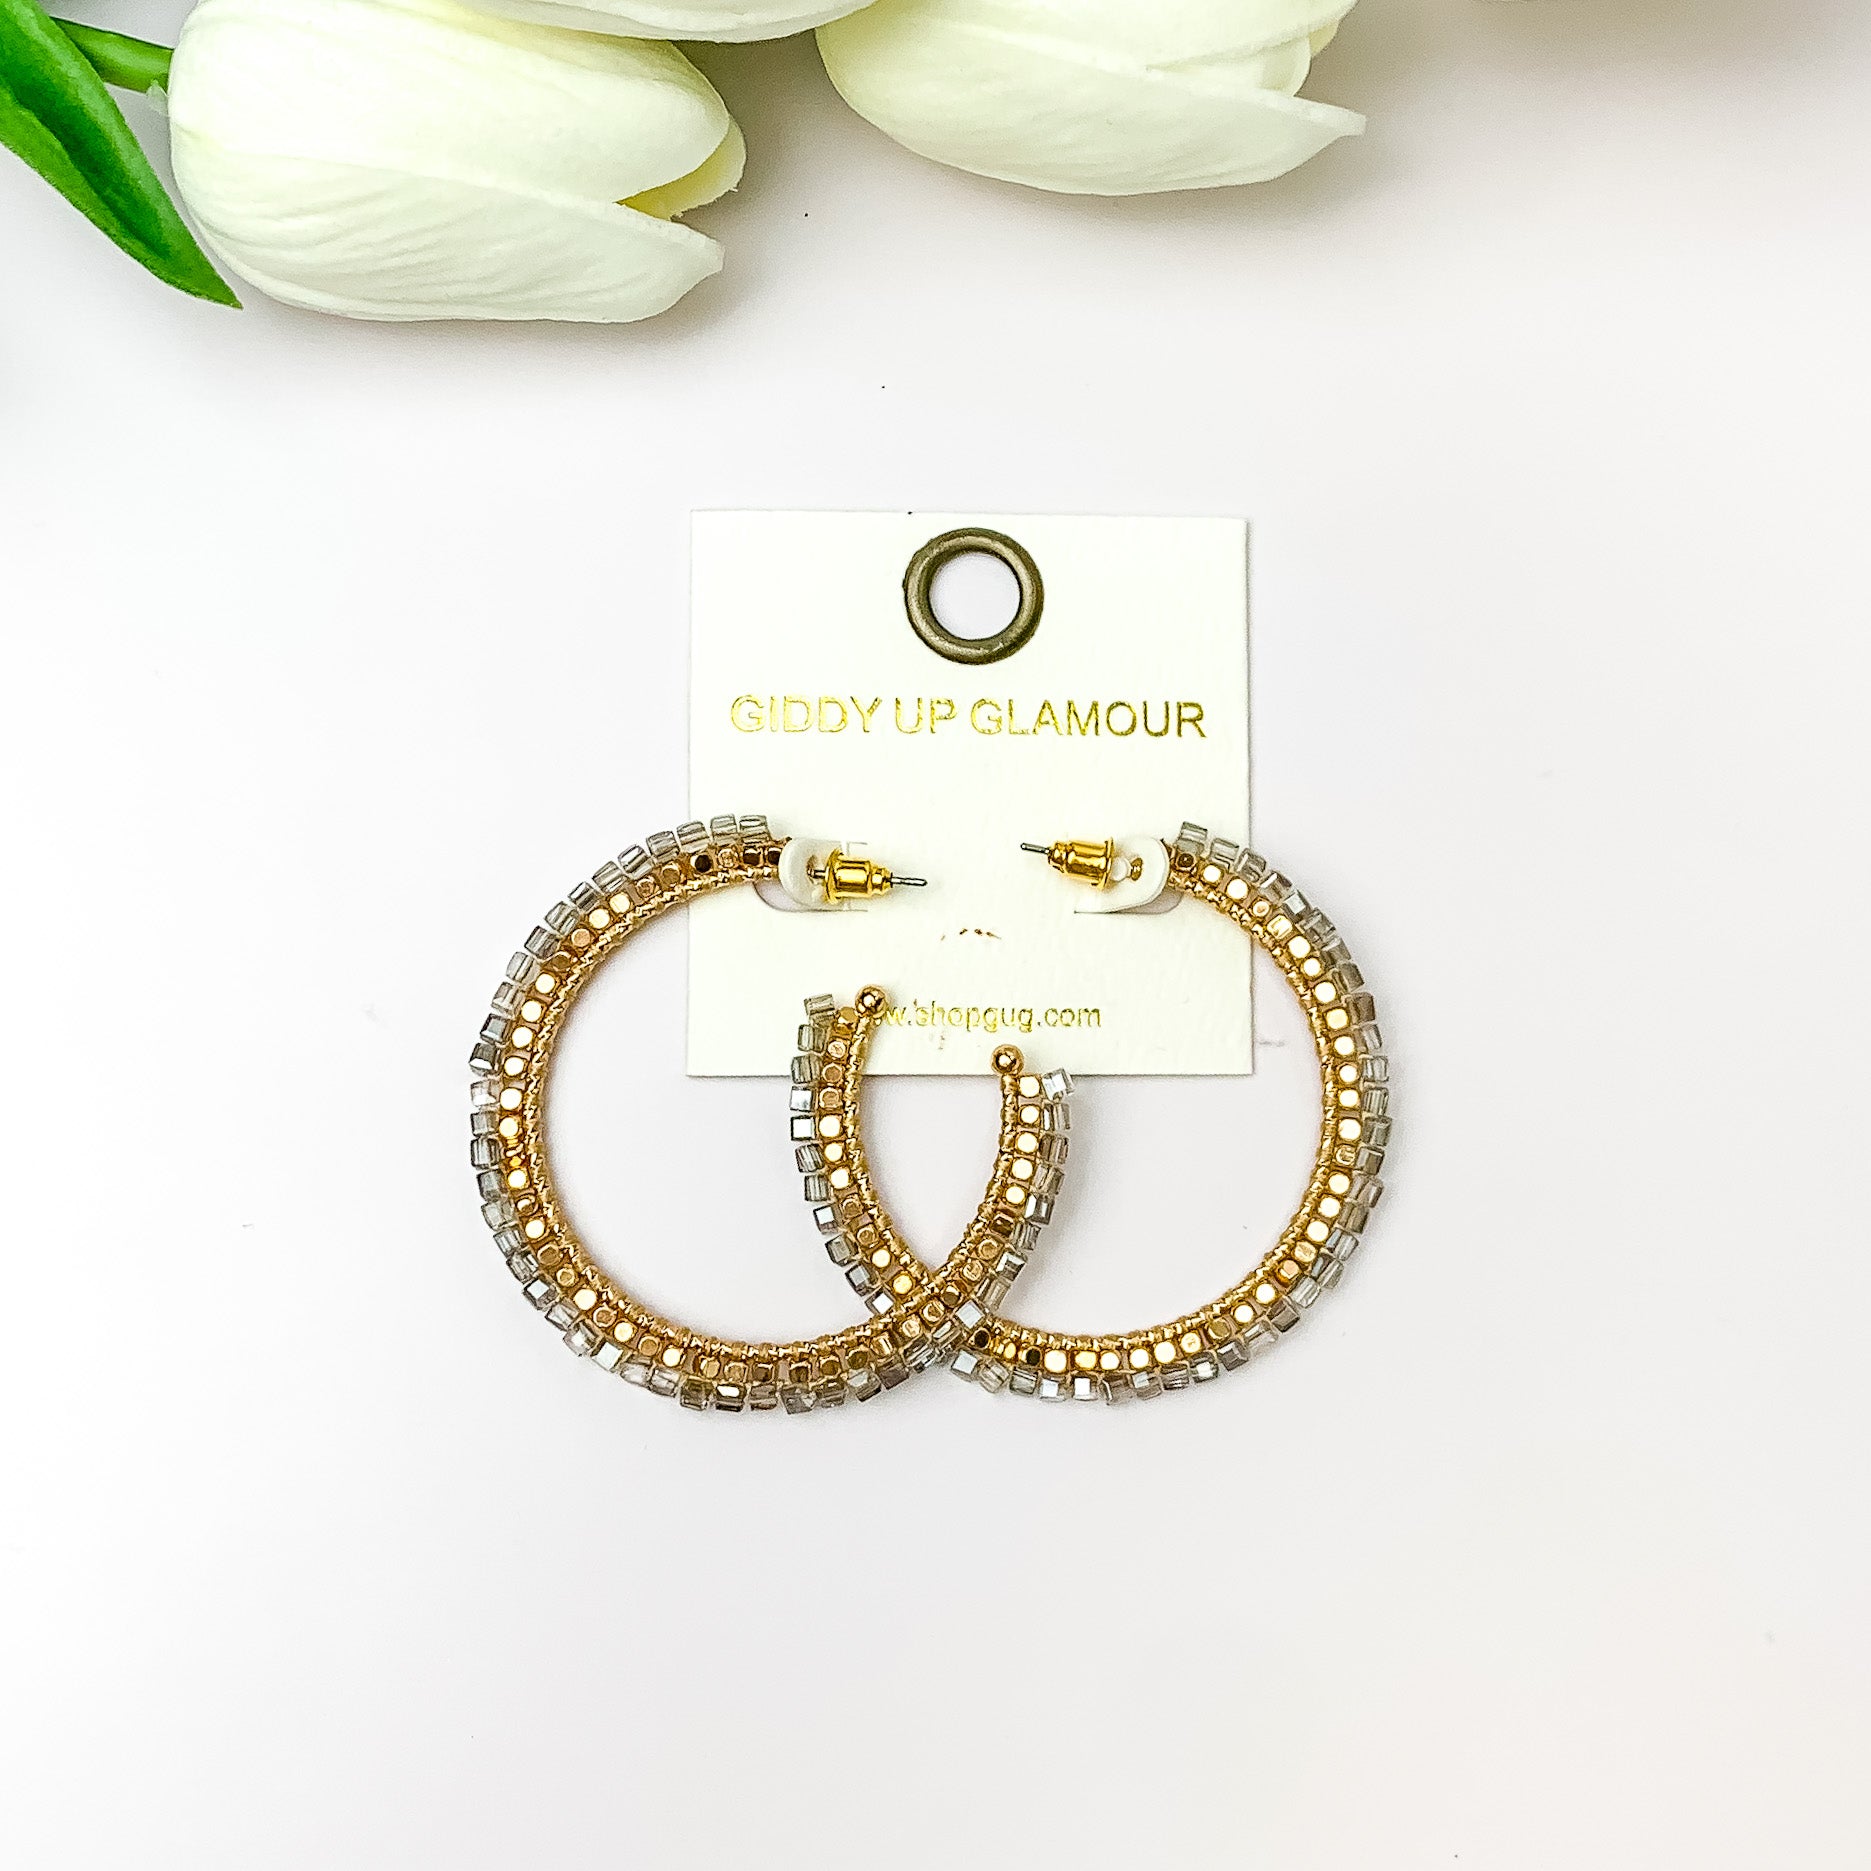  Pictured are circle gold toned hoop earrings with gold beads around it and a grey crystal outline. They are pictured with white flowers on a white background.